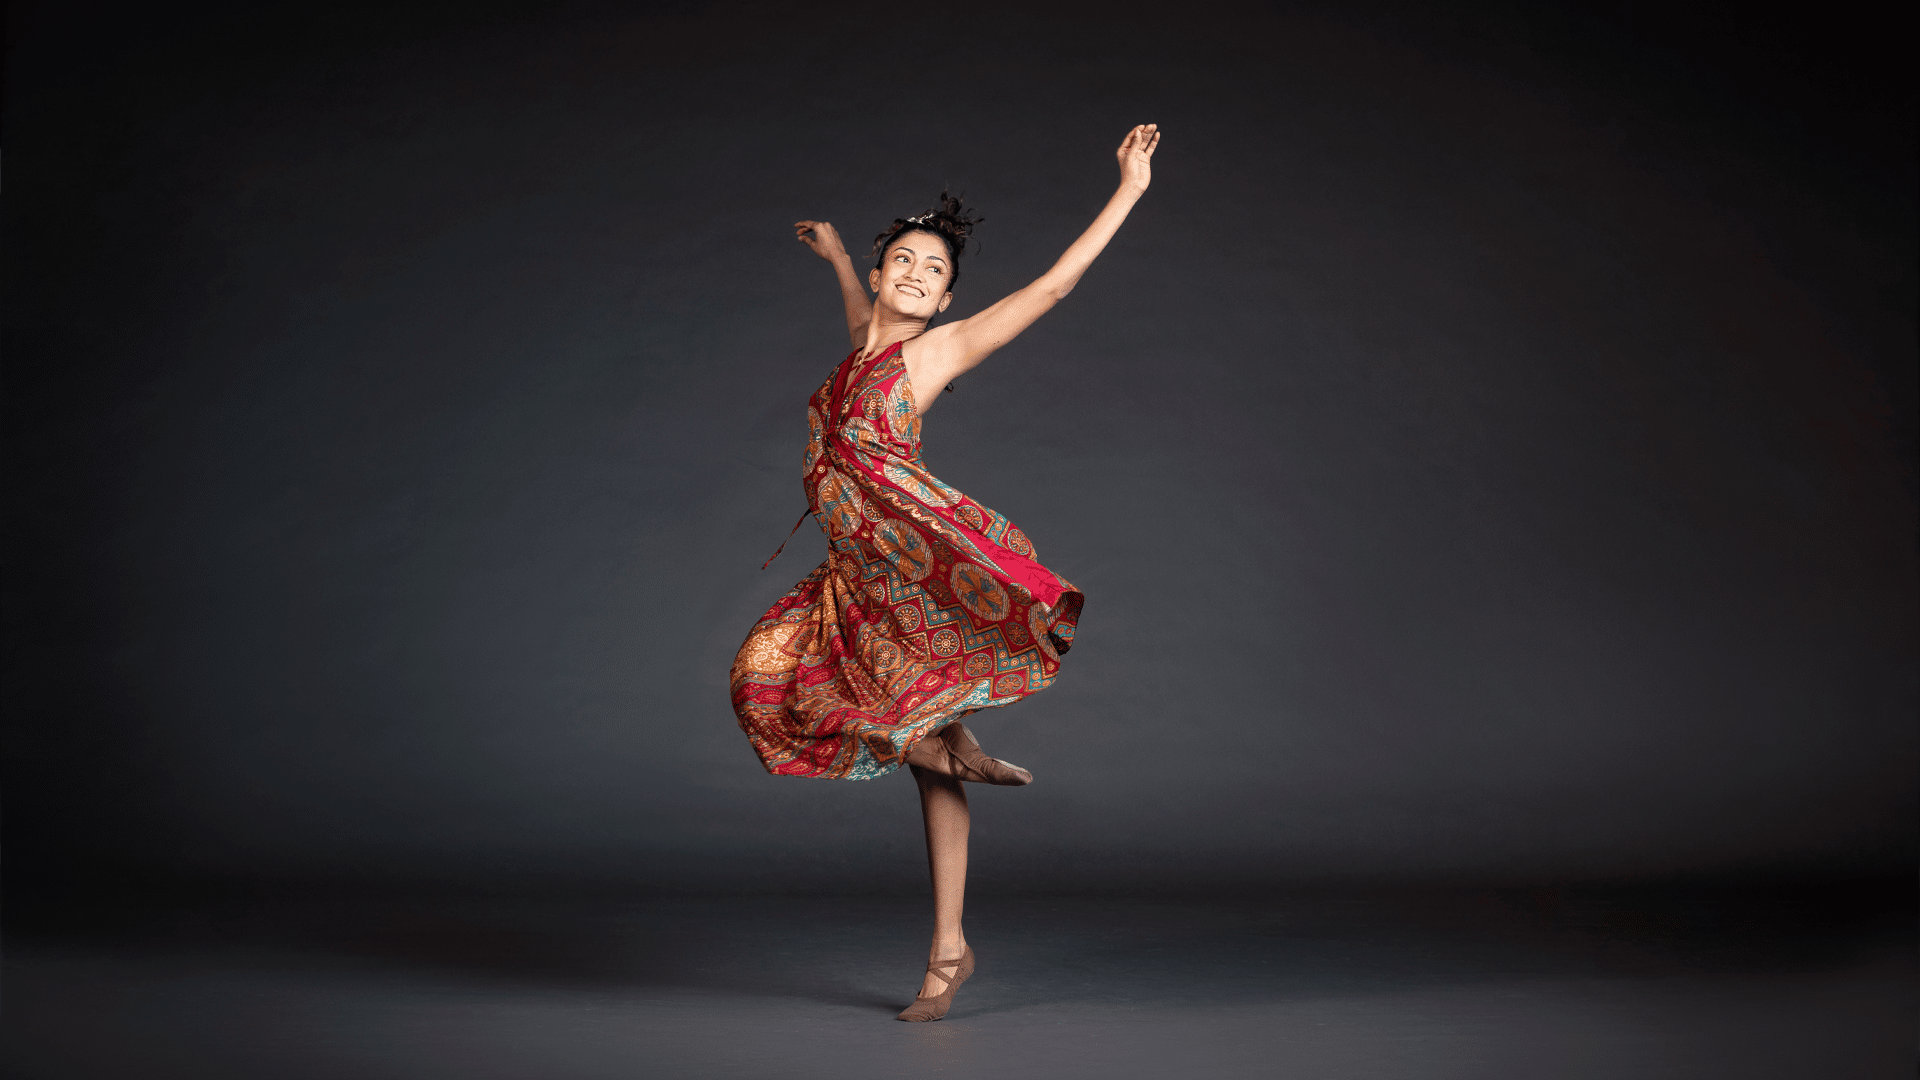 A ballet dancer balanced on one foot, arms outstretched, and smiling